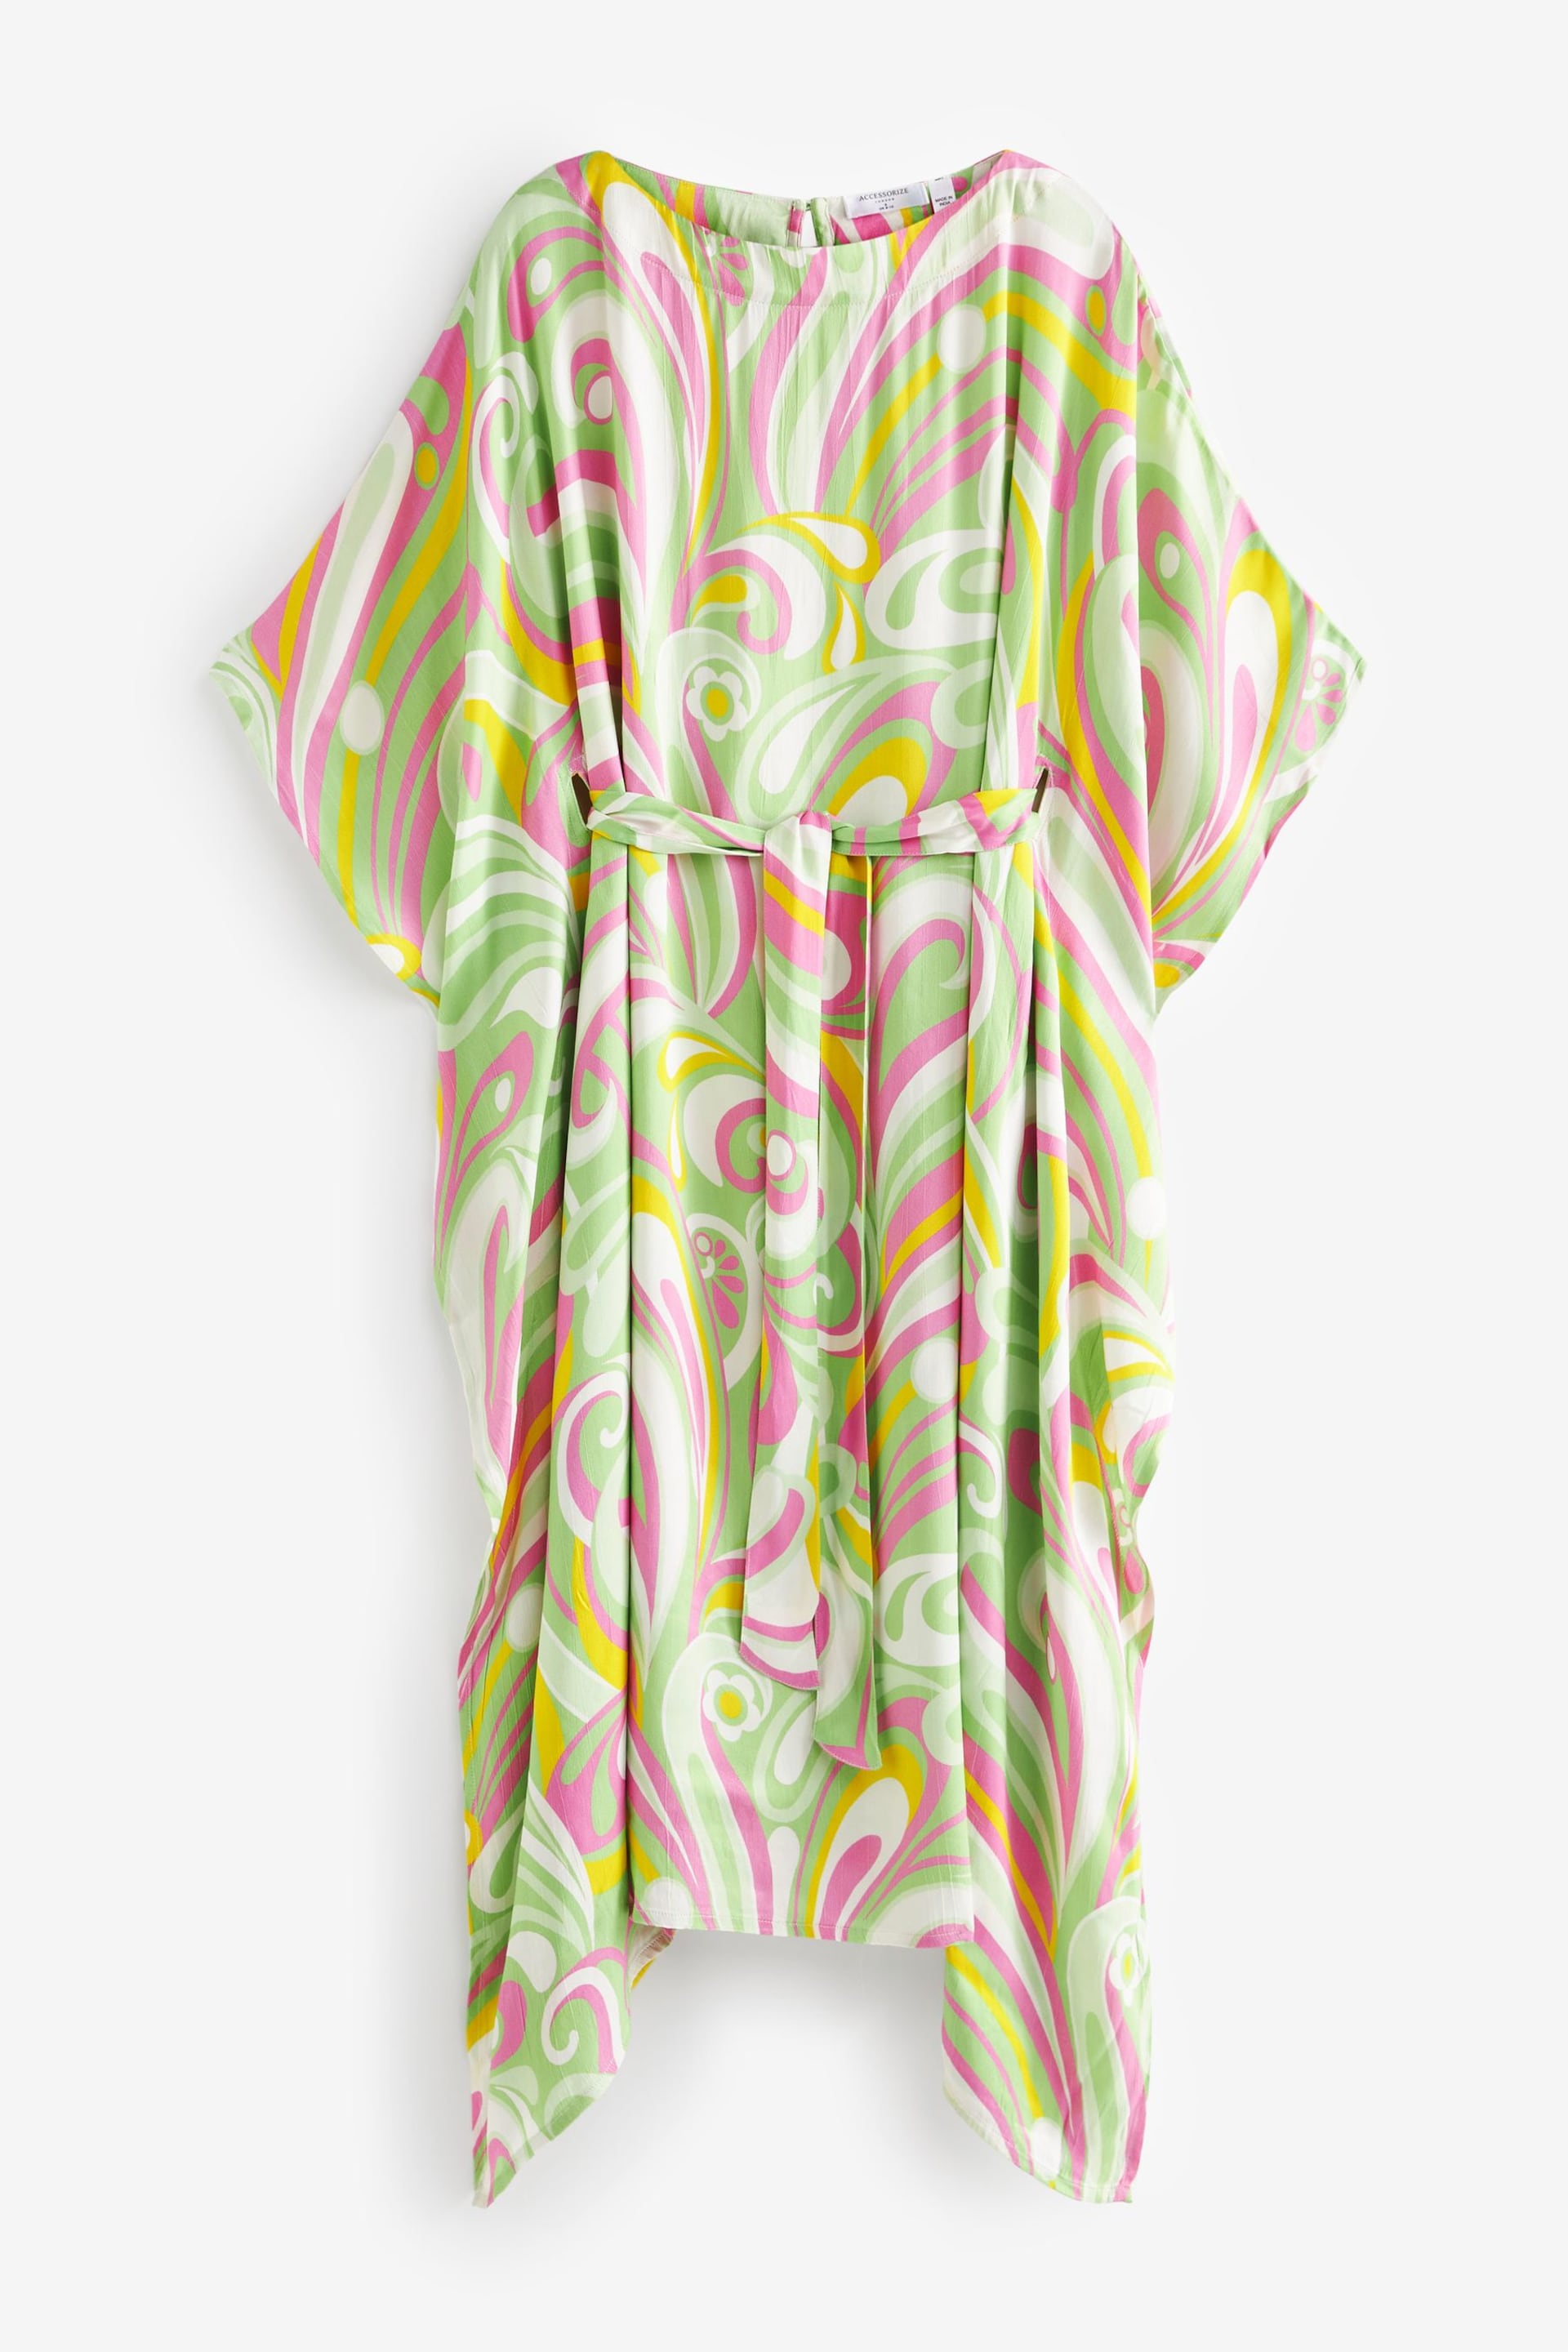 Accessorize Multi Swirl Belted Cover-Up - Image 4 of 4